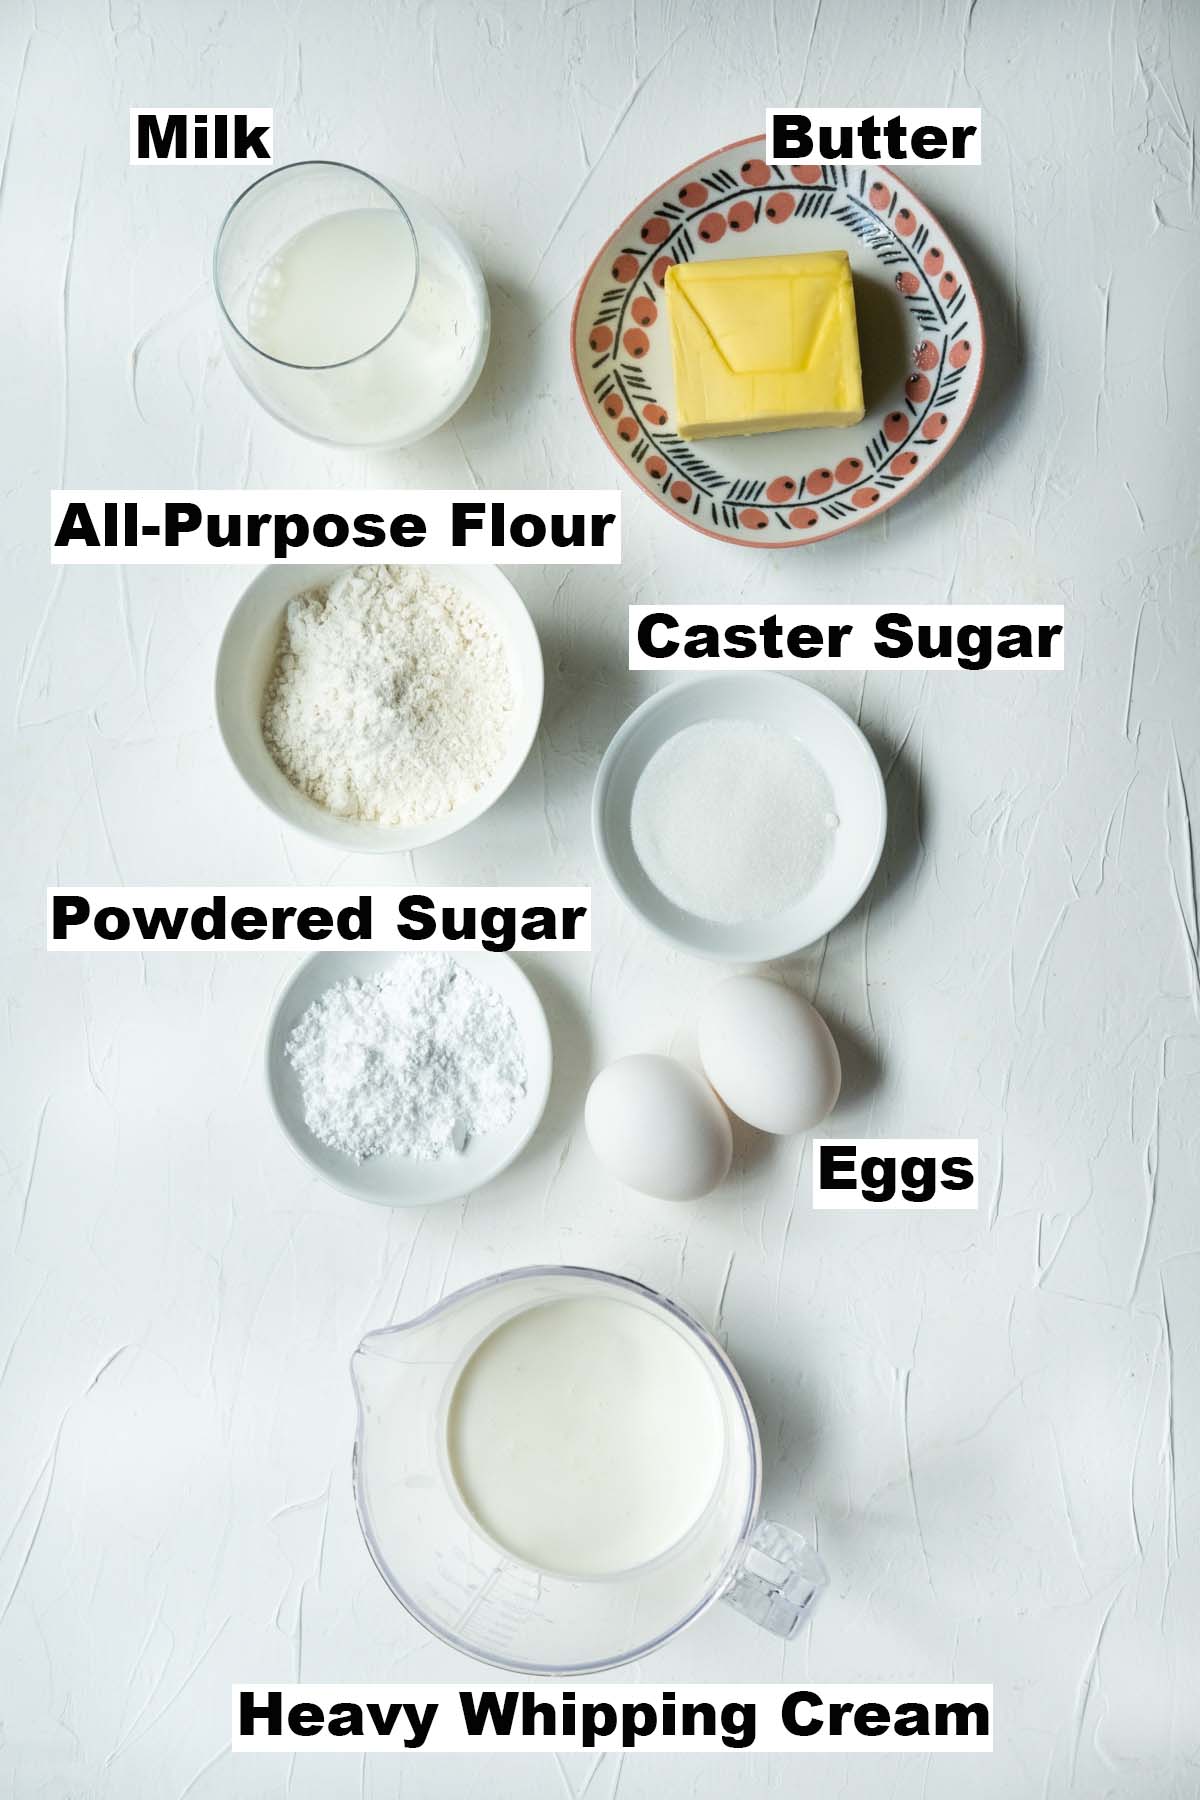 Cream filled choux pastry ingredients. 